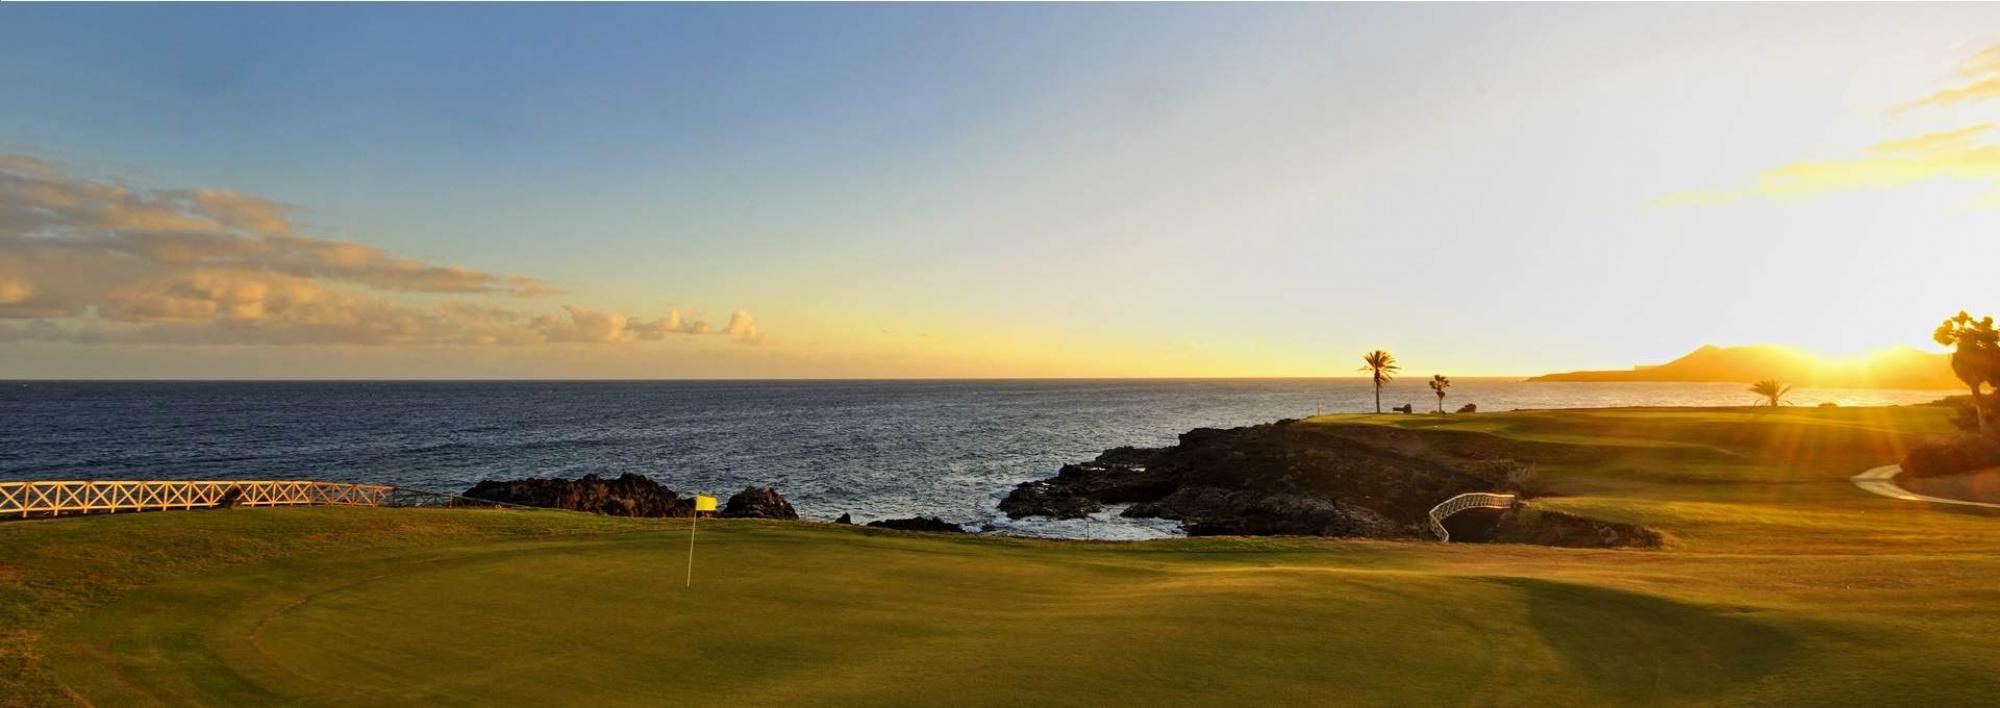 The Amarilla Golf and Country Club's lovely golf course within magnificent Tenerife.